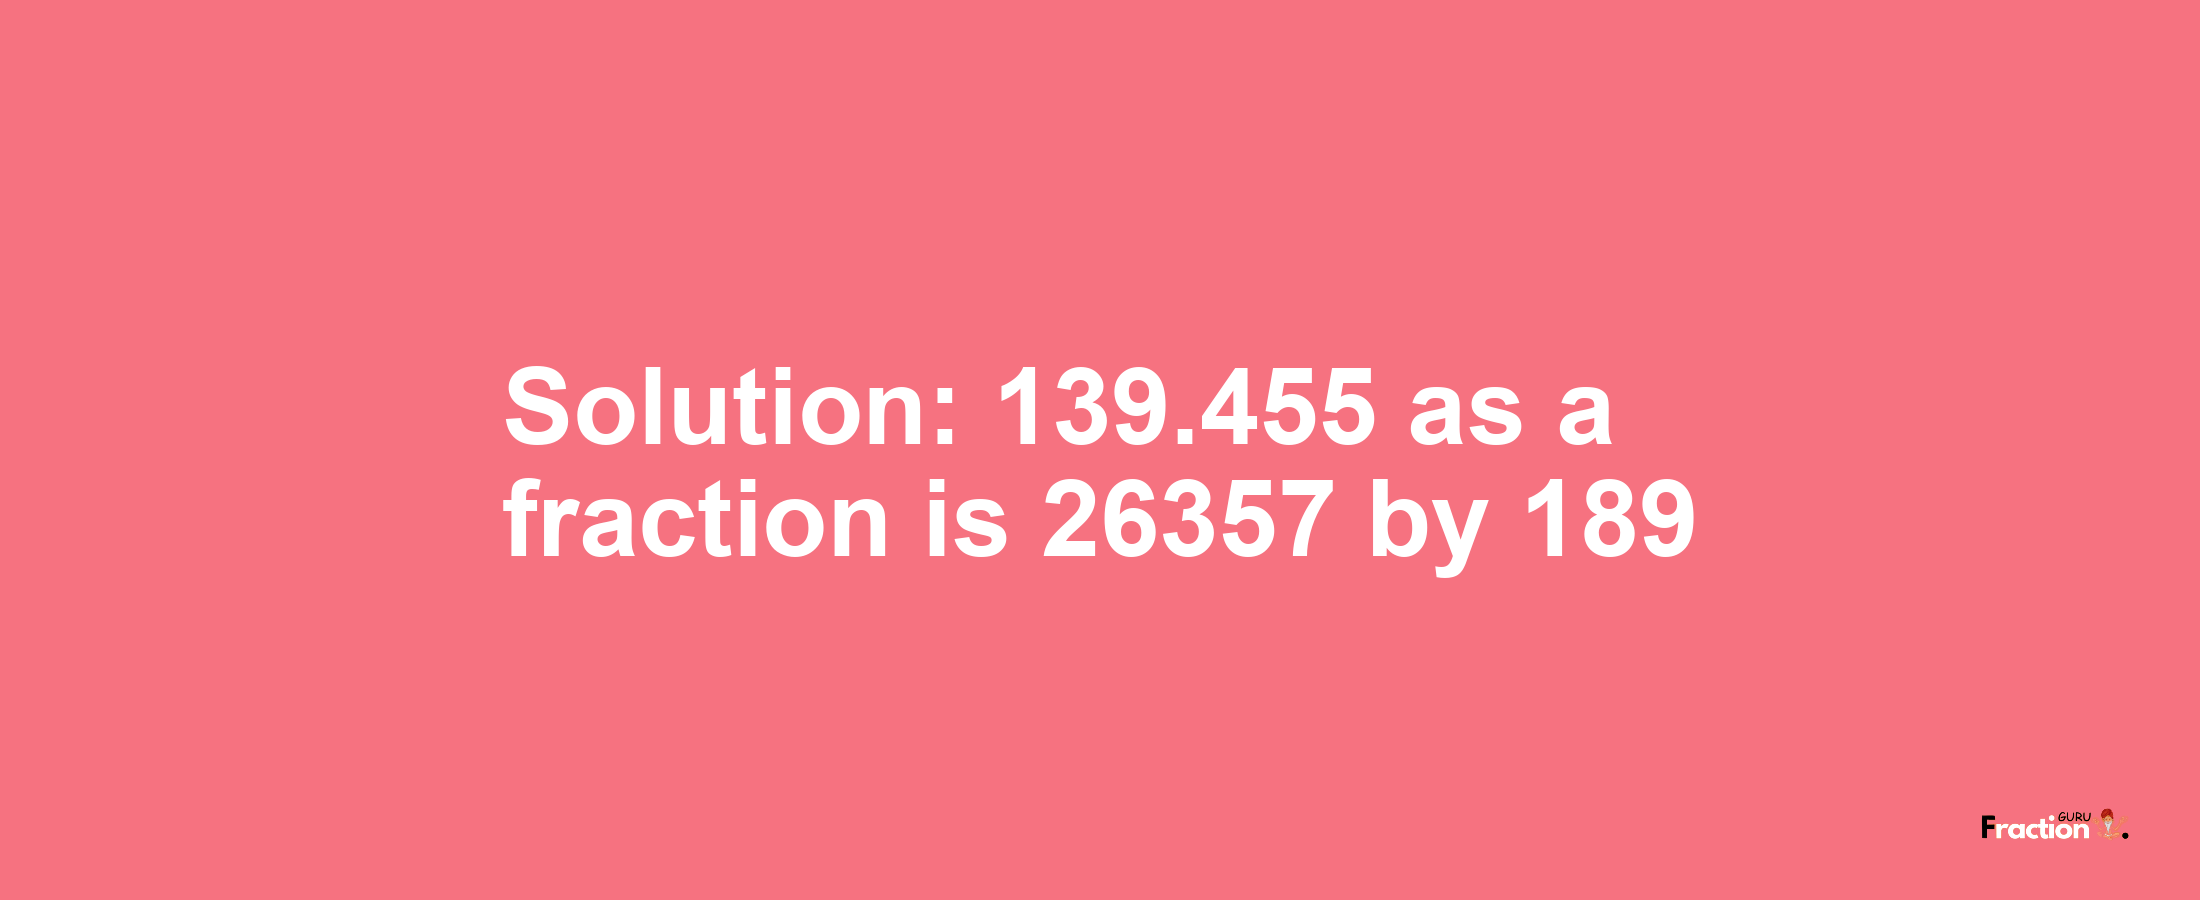 Solution:139.455 as a fraction is 26357/189